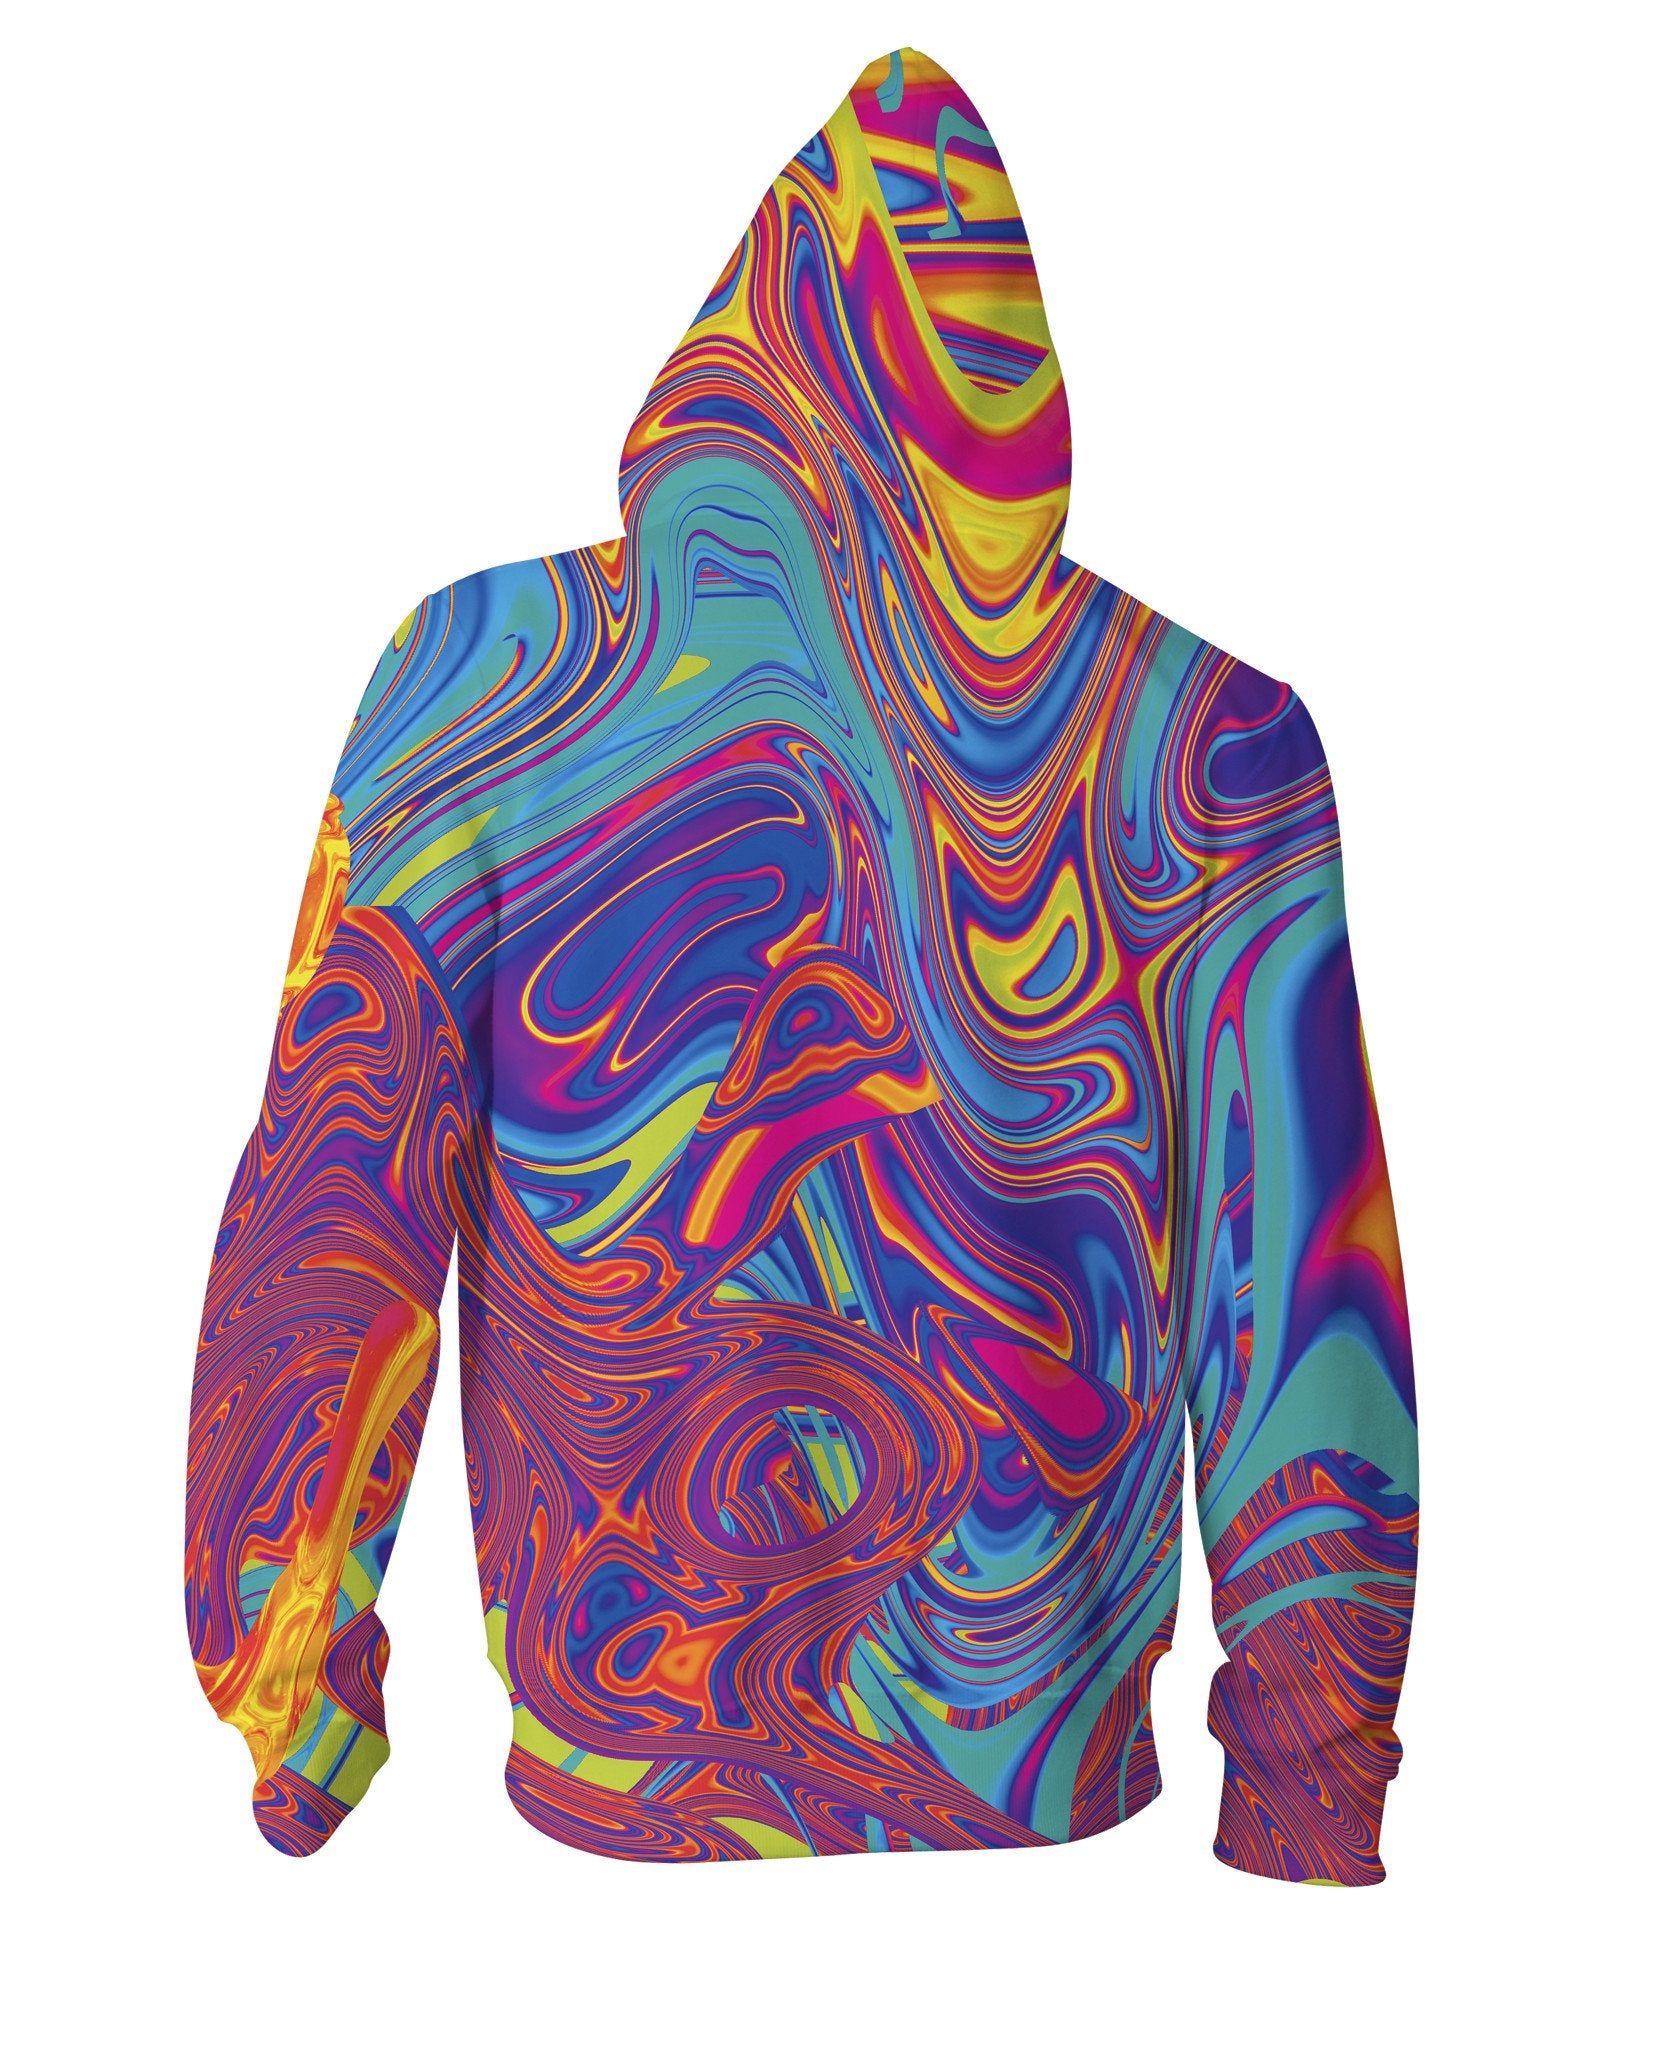 Oil Spill Colorful Hoodie - PVRP Shop